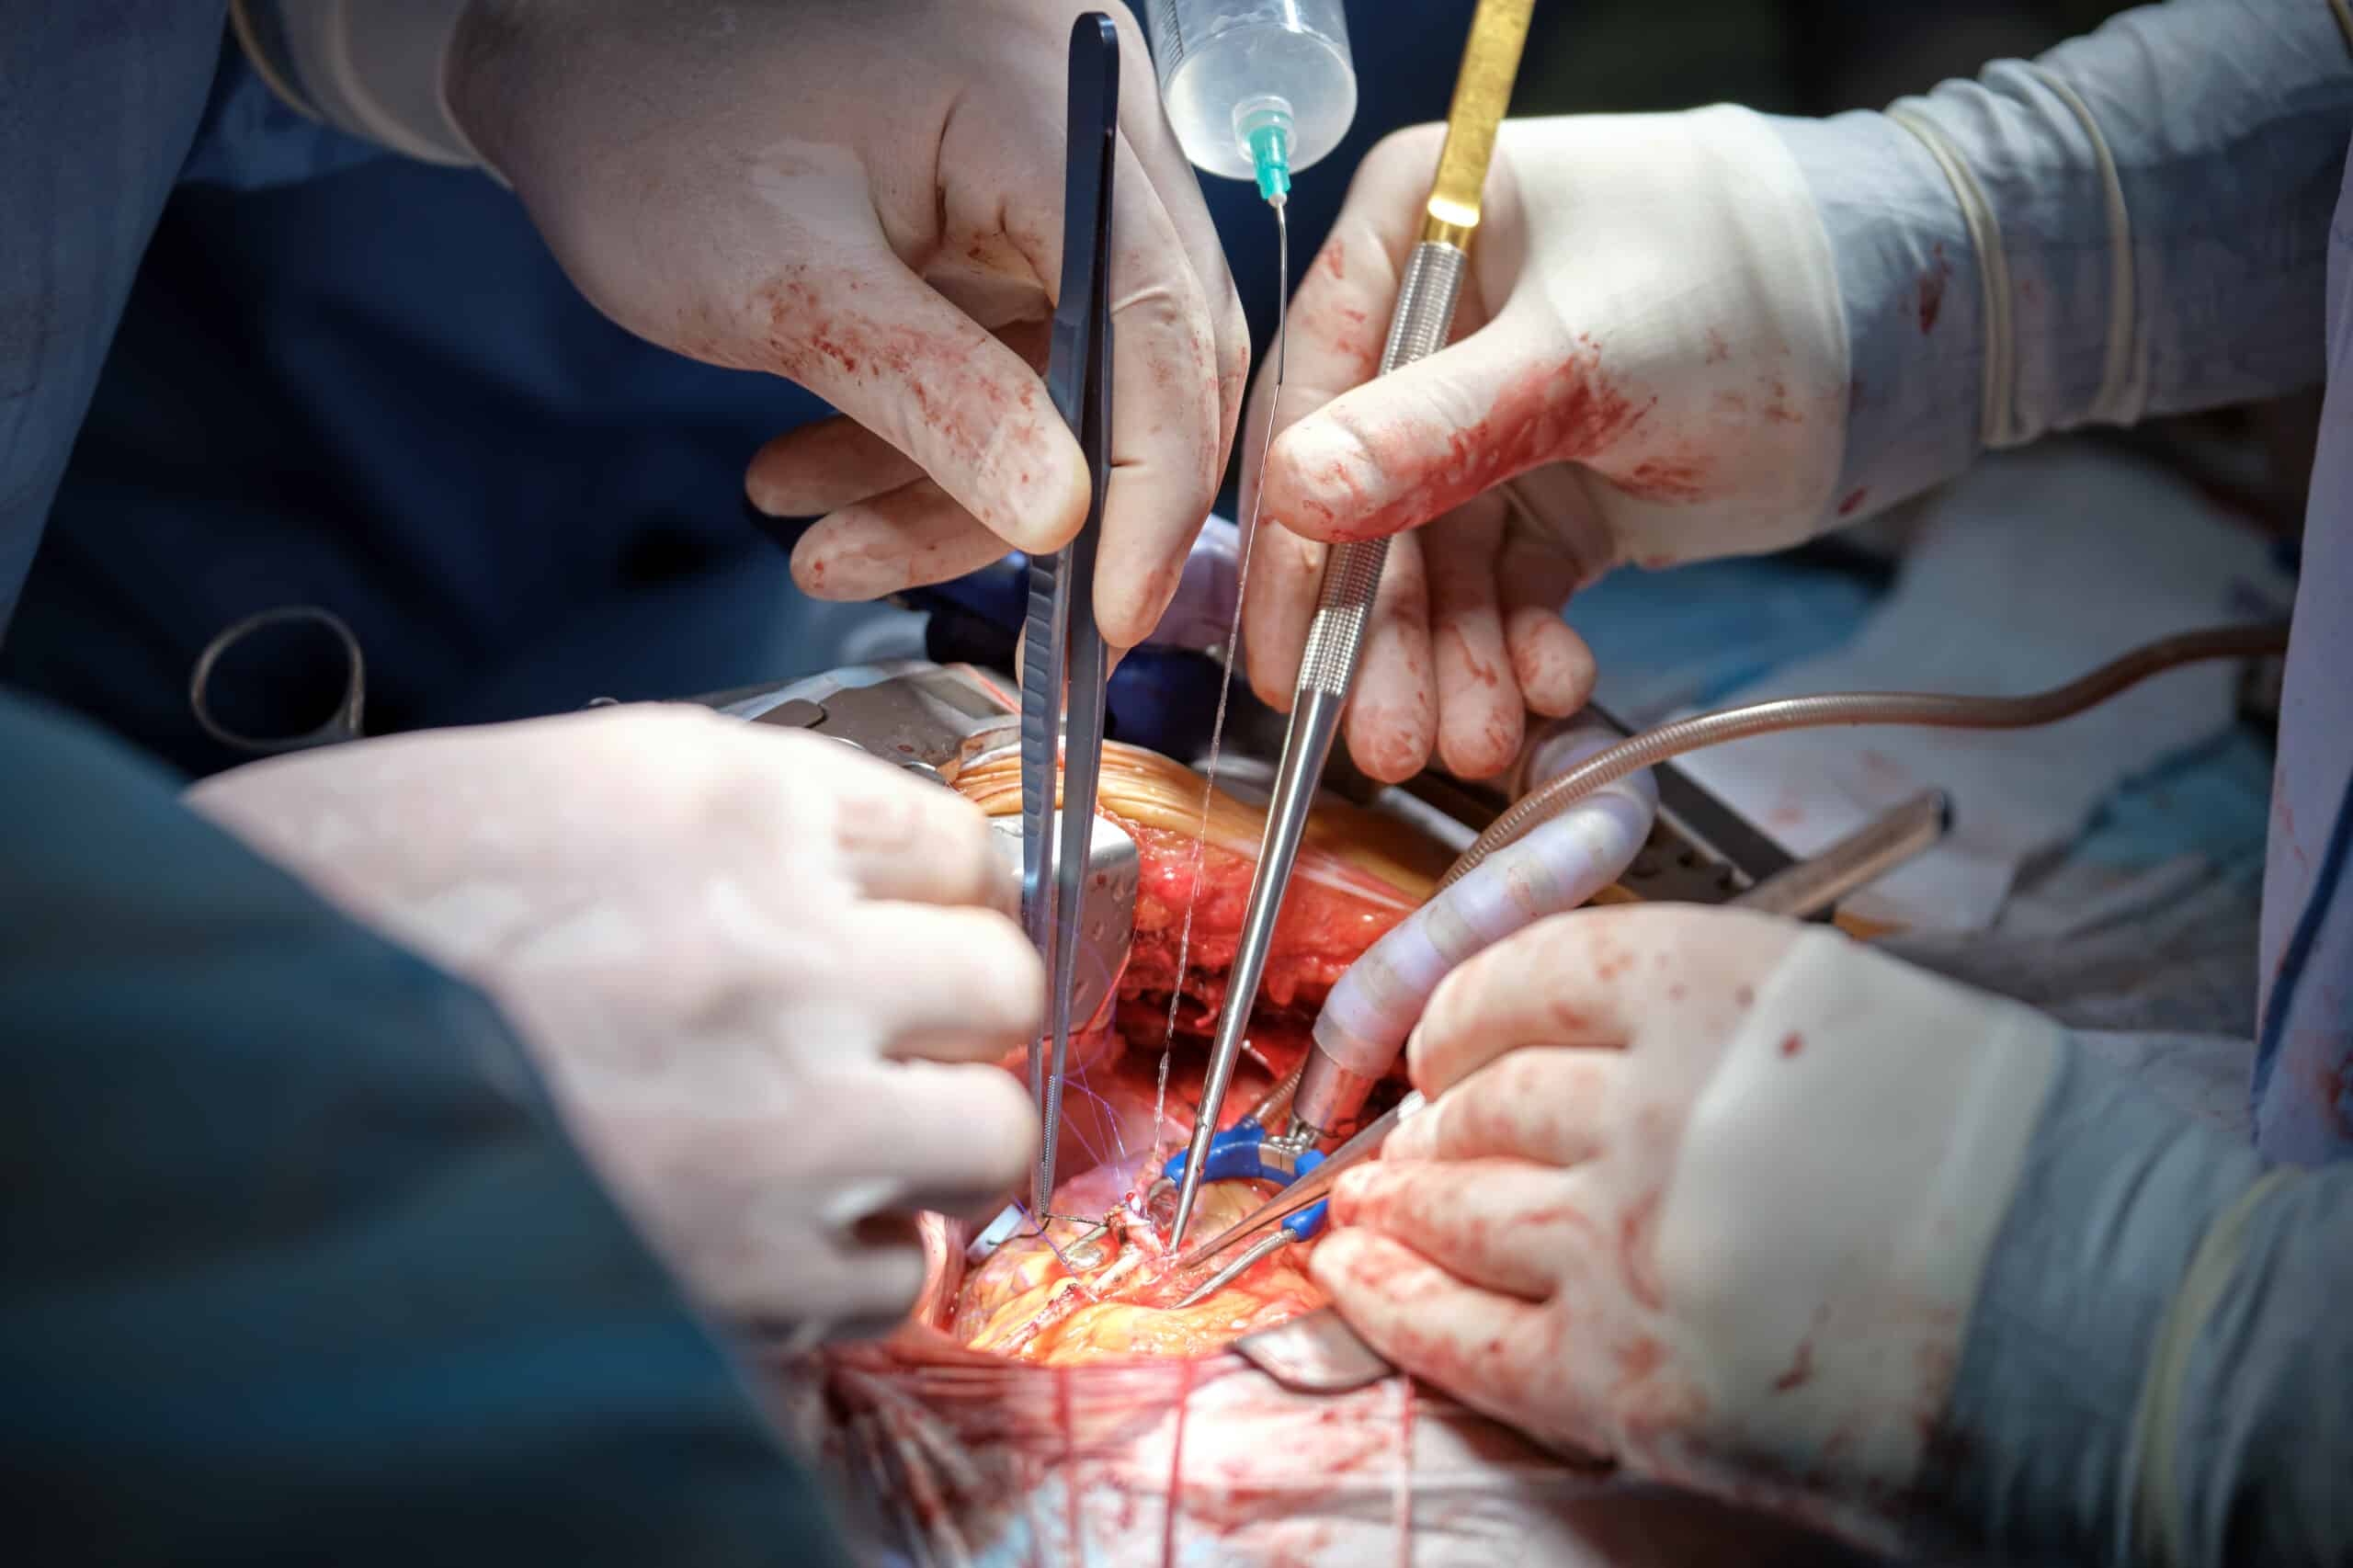 Closeup of professional doctor hands operating a patient during open heart surgery in surgical room